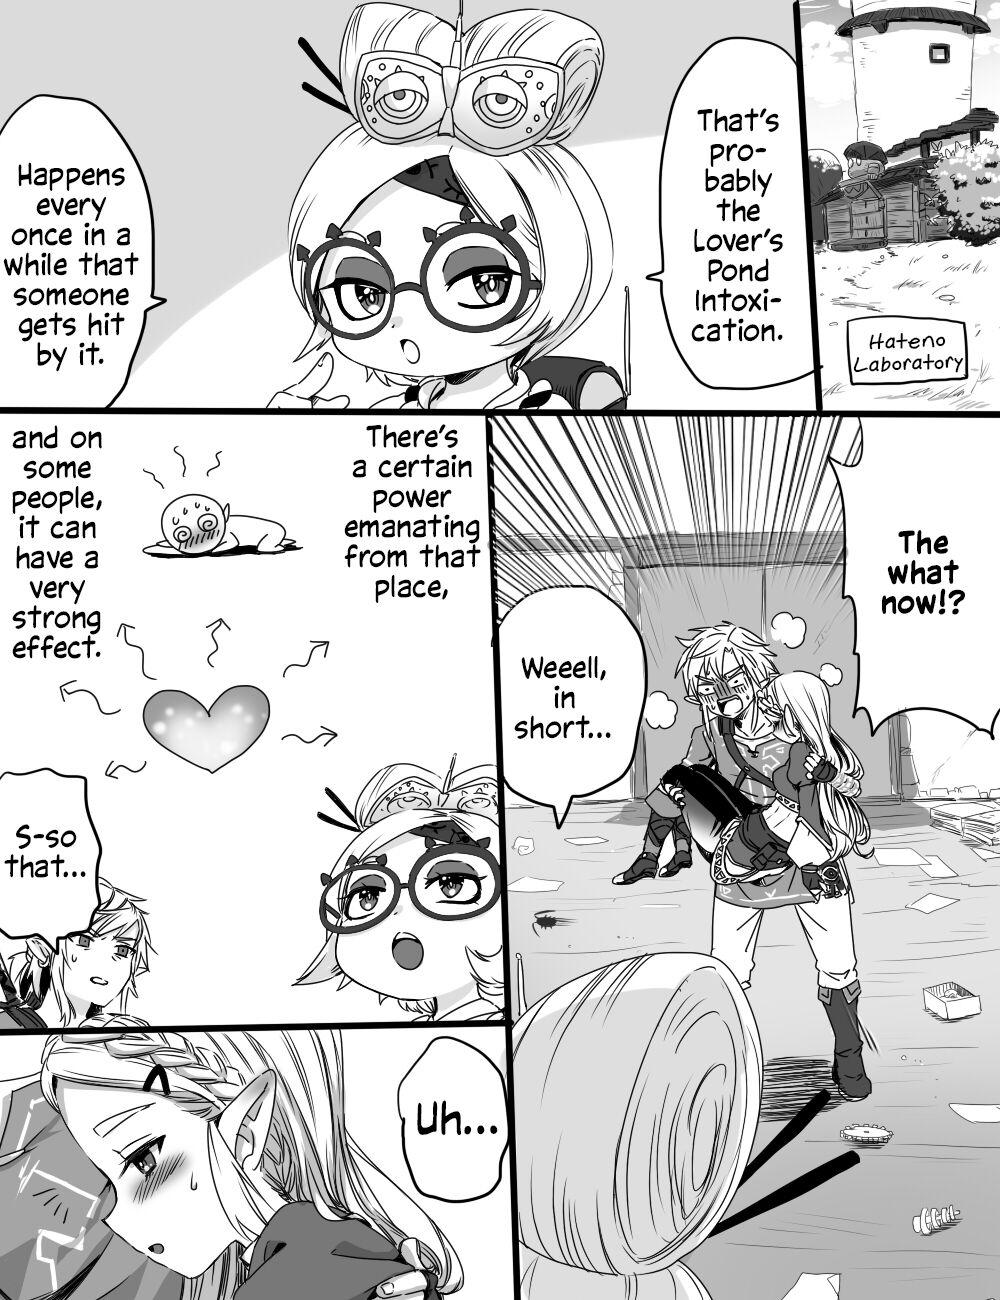 Madura Love Pond Power | The Power of the Lover's Pond - The legend of zelda Nalgona - Page 4